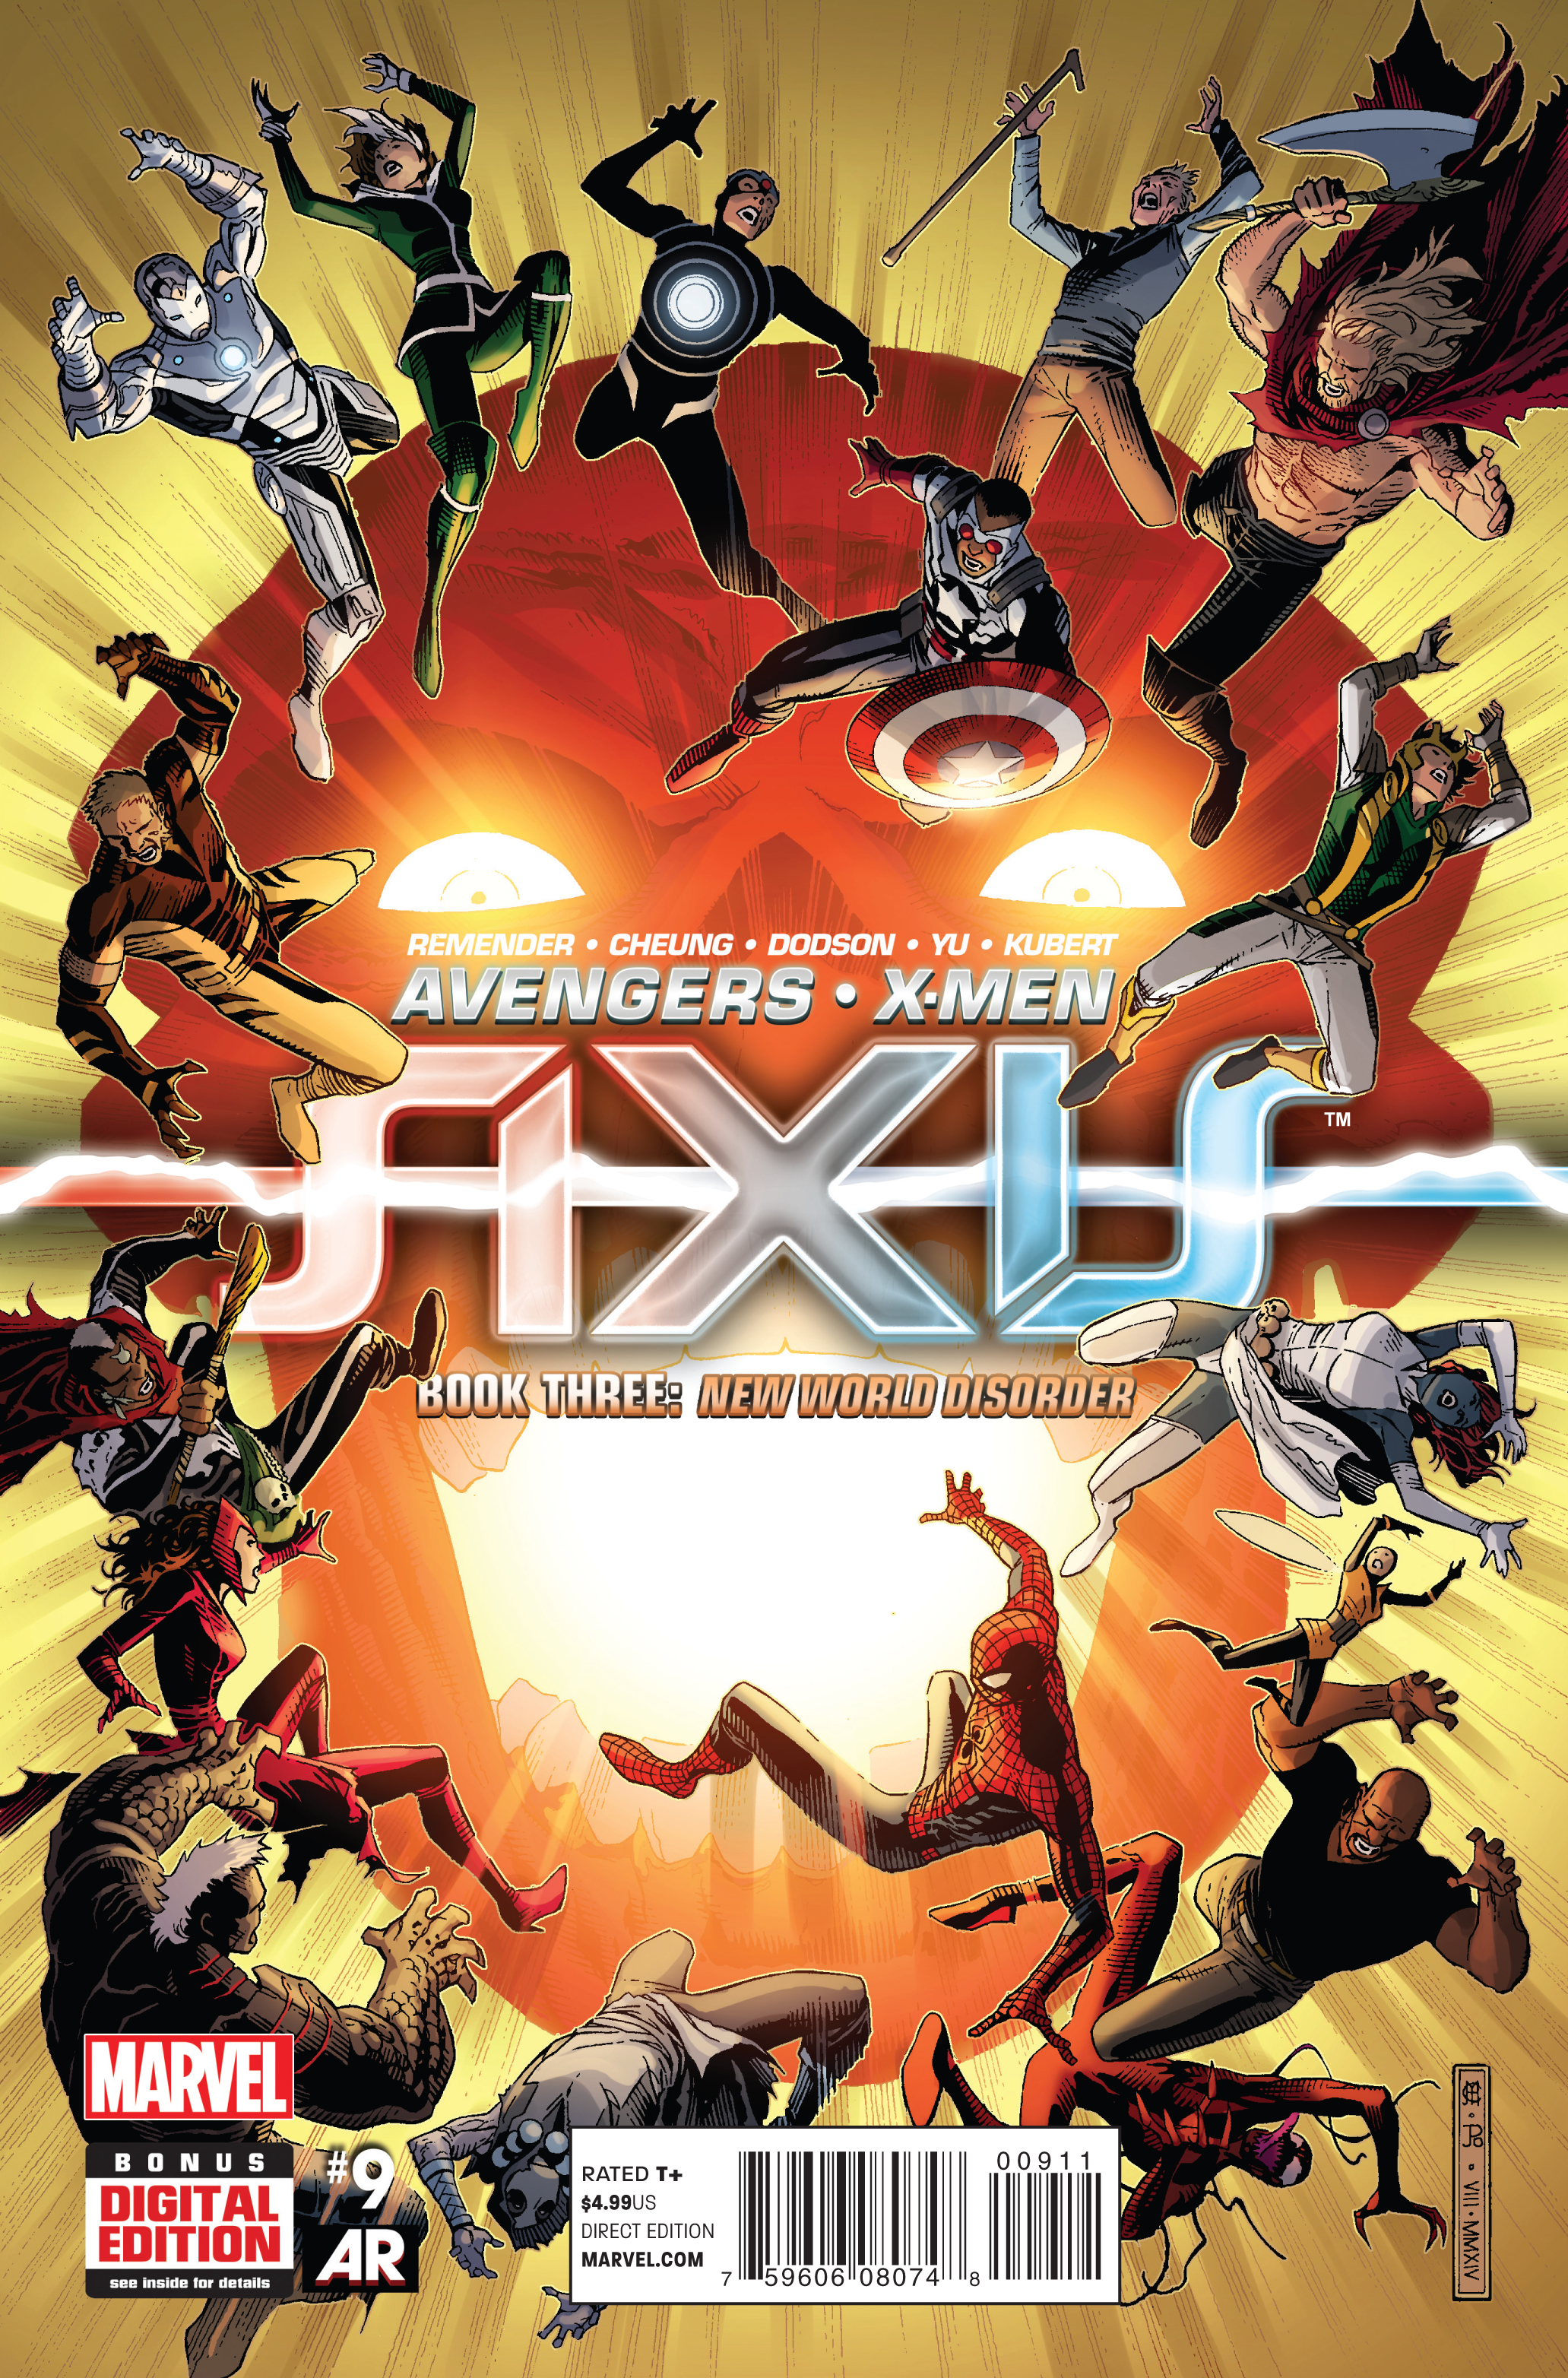 AVENGERS AND X-MEN AXIS #9 (OF 9)